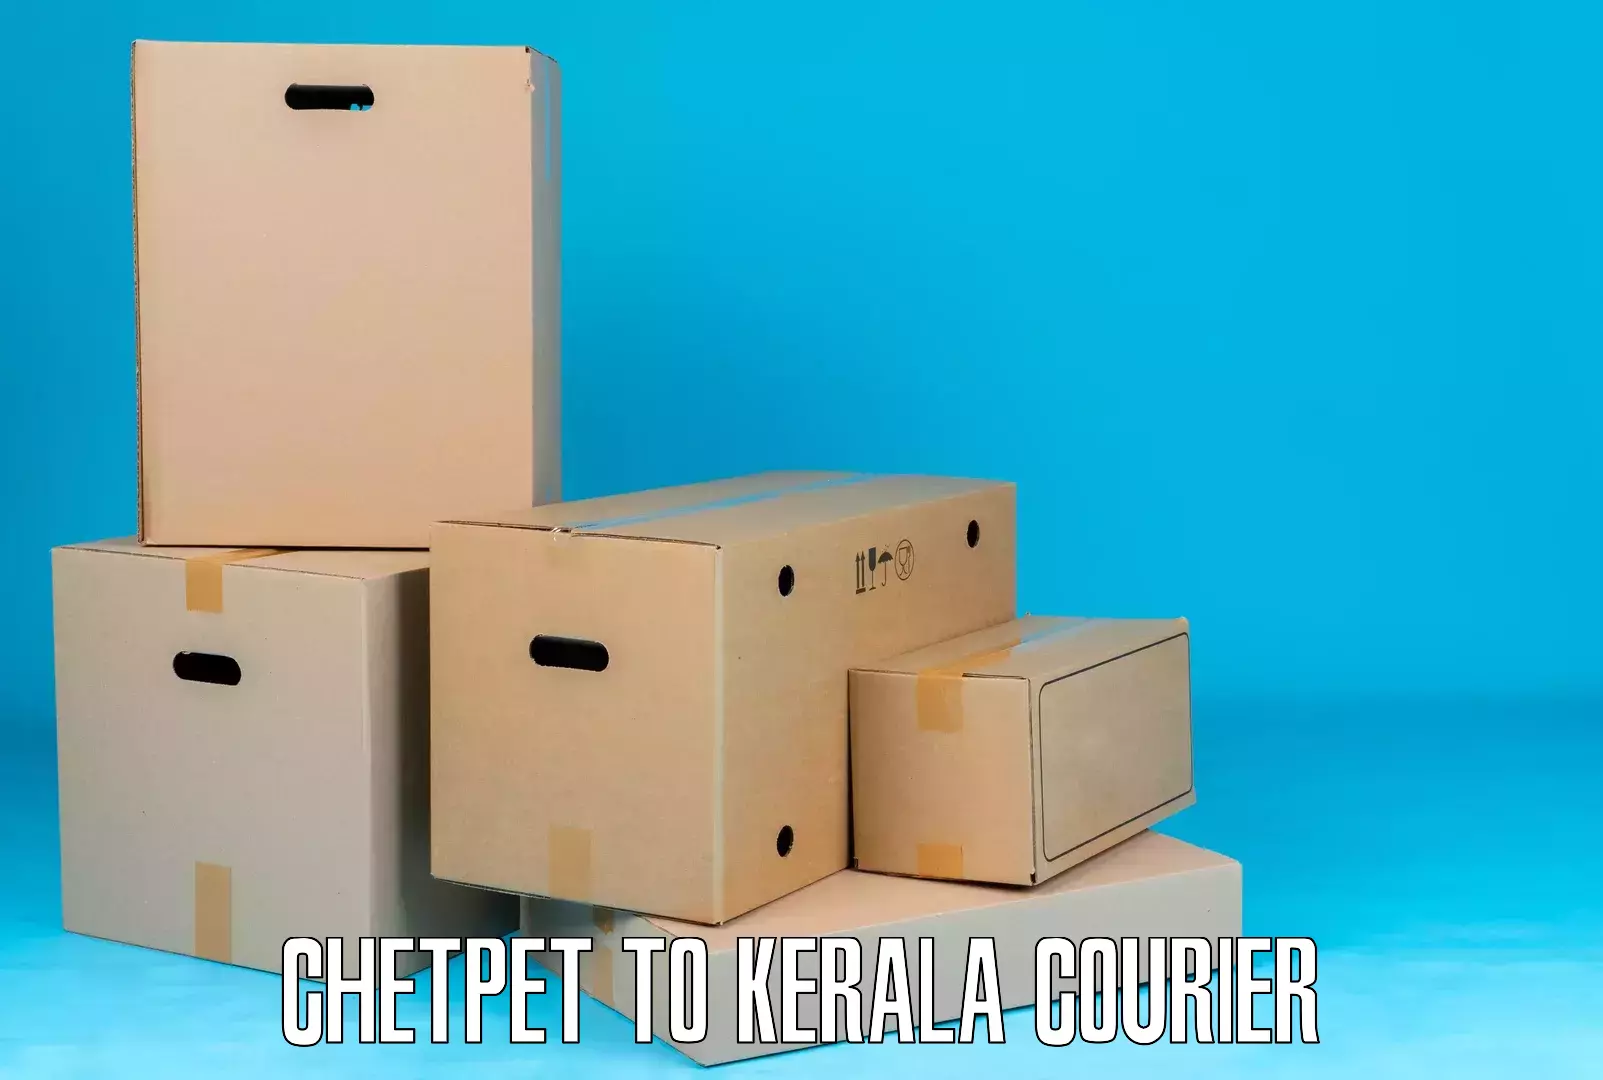 Quality courier partnerships Chetpet to Kottayam